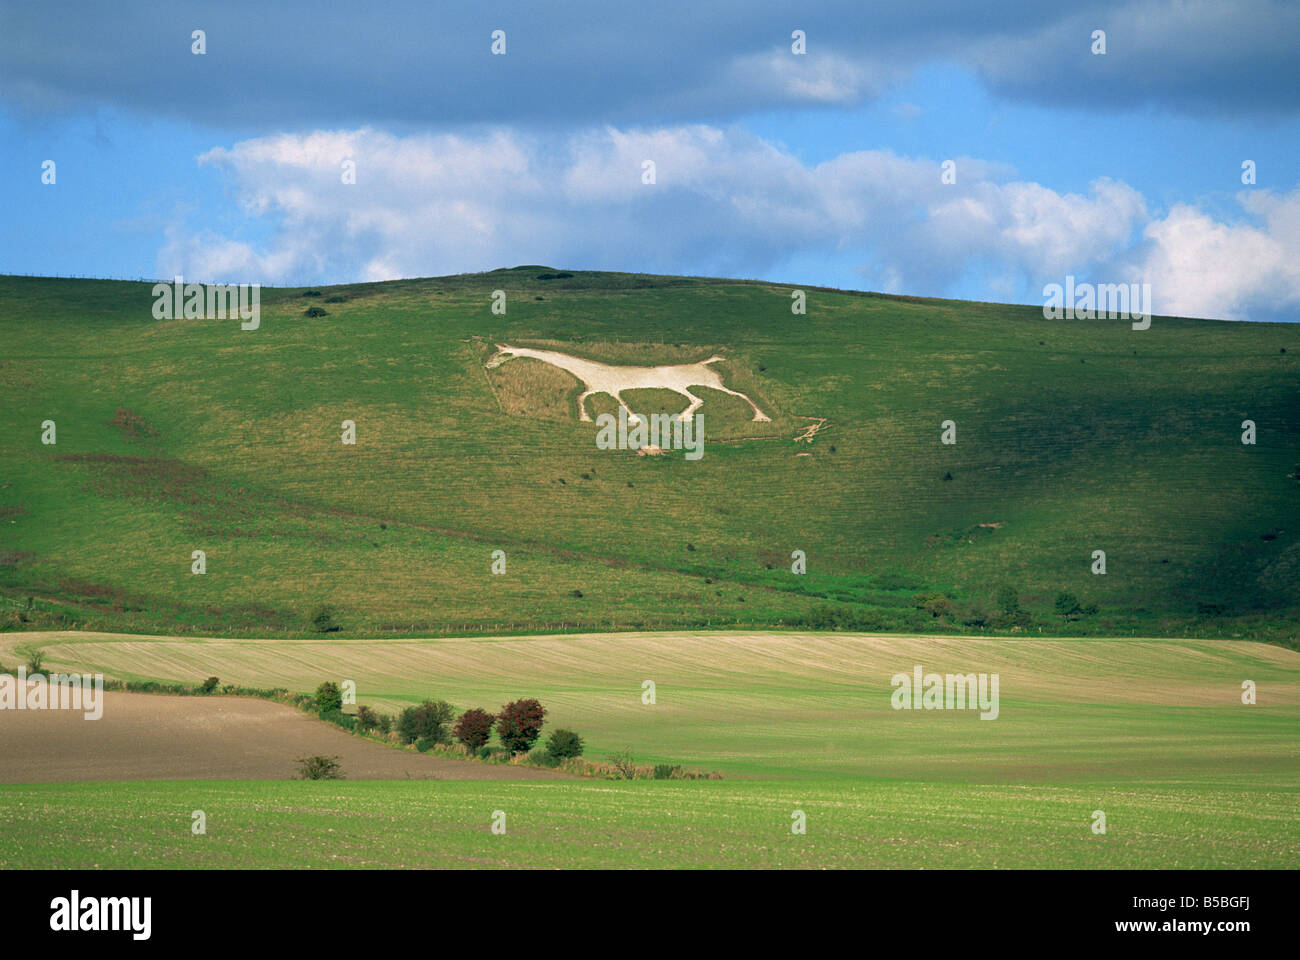 White horse dating from 1812 carved in chalk on Milk Hill, Marlborough Downs, overlooking Vale of Pewsey, Wiltshire, England Stock Photo